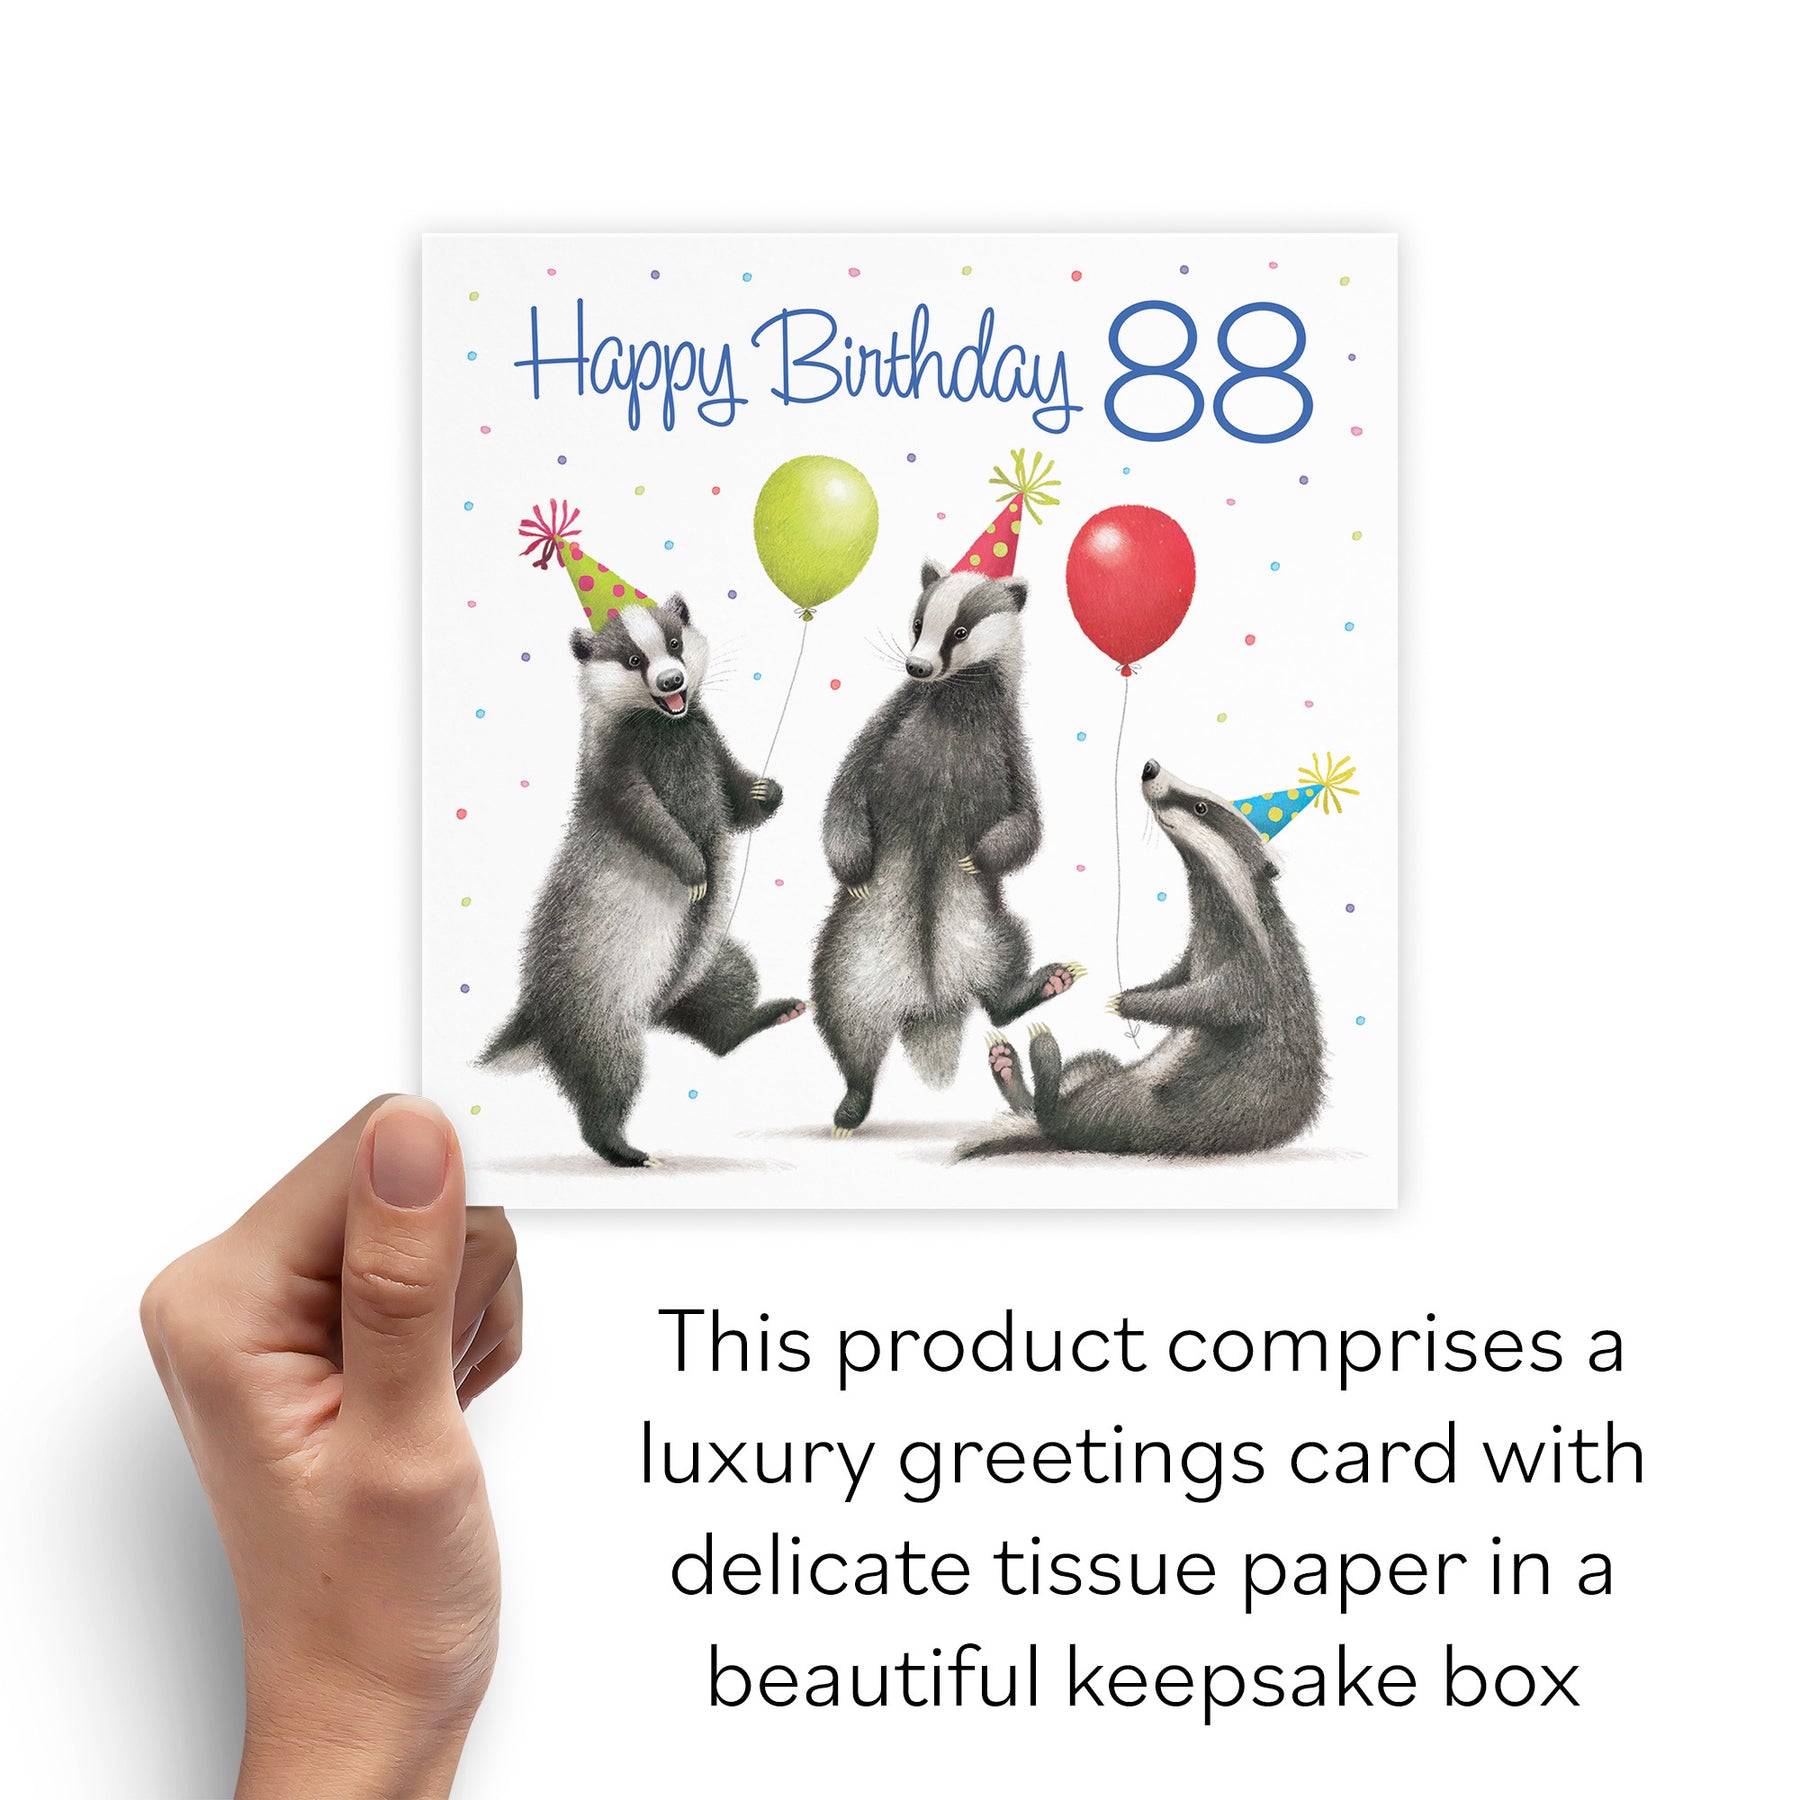 Boxed Badgers 88th Birthday Card Milo's Gallery – Hunts England